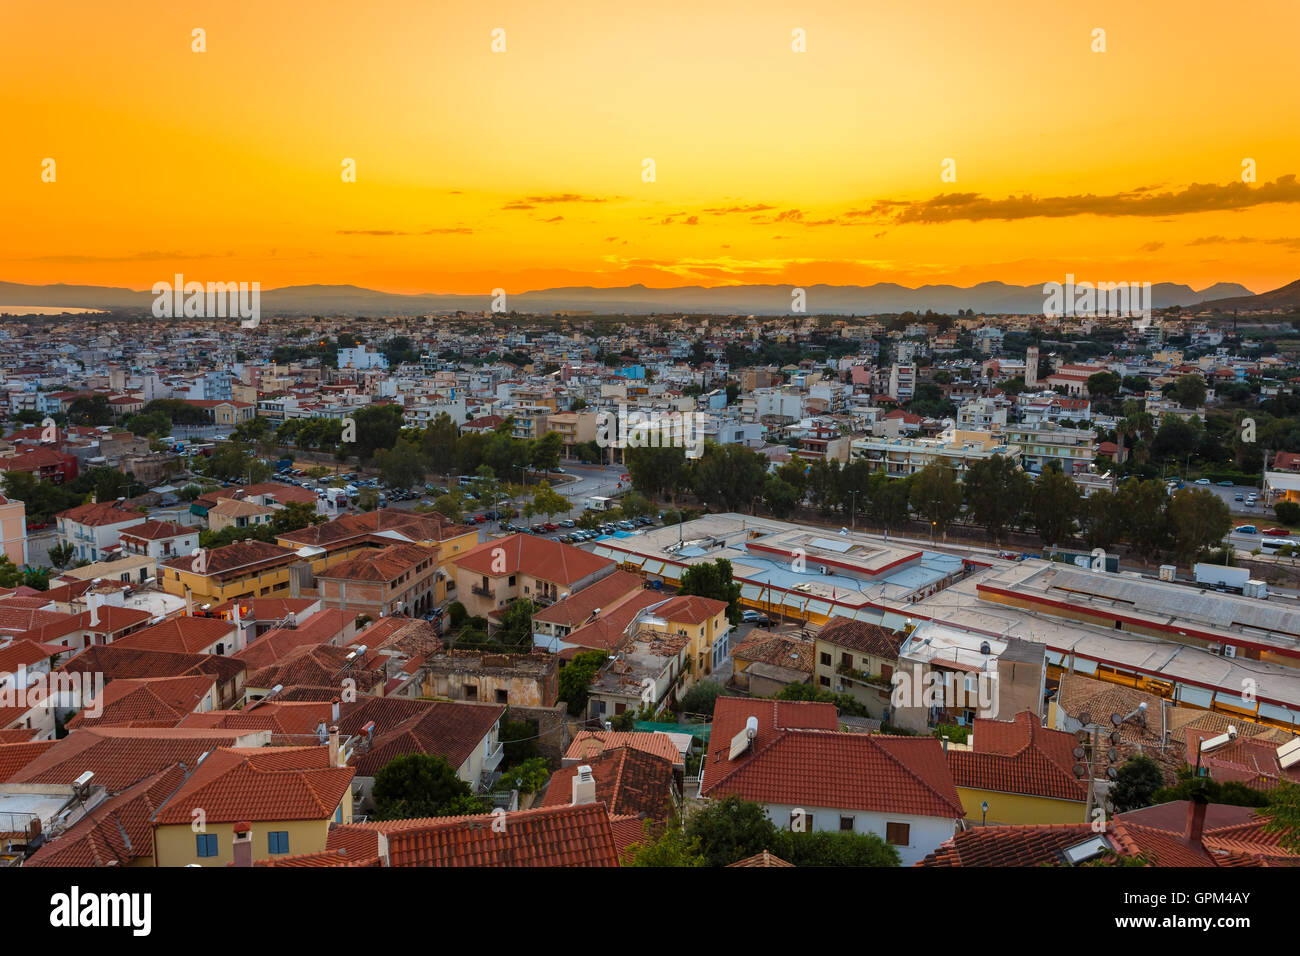 Kalamata city skyline in the evening after sunset with city lights in the foreground Stock Photo